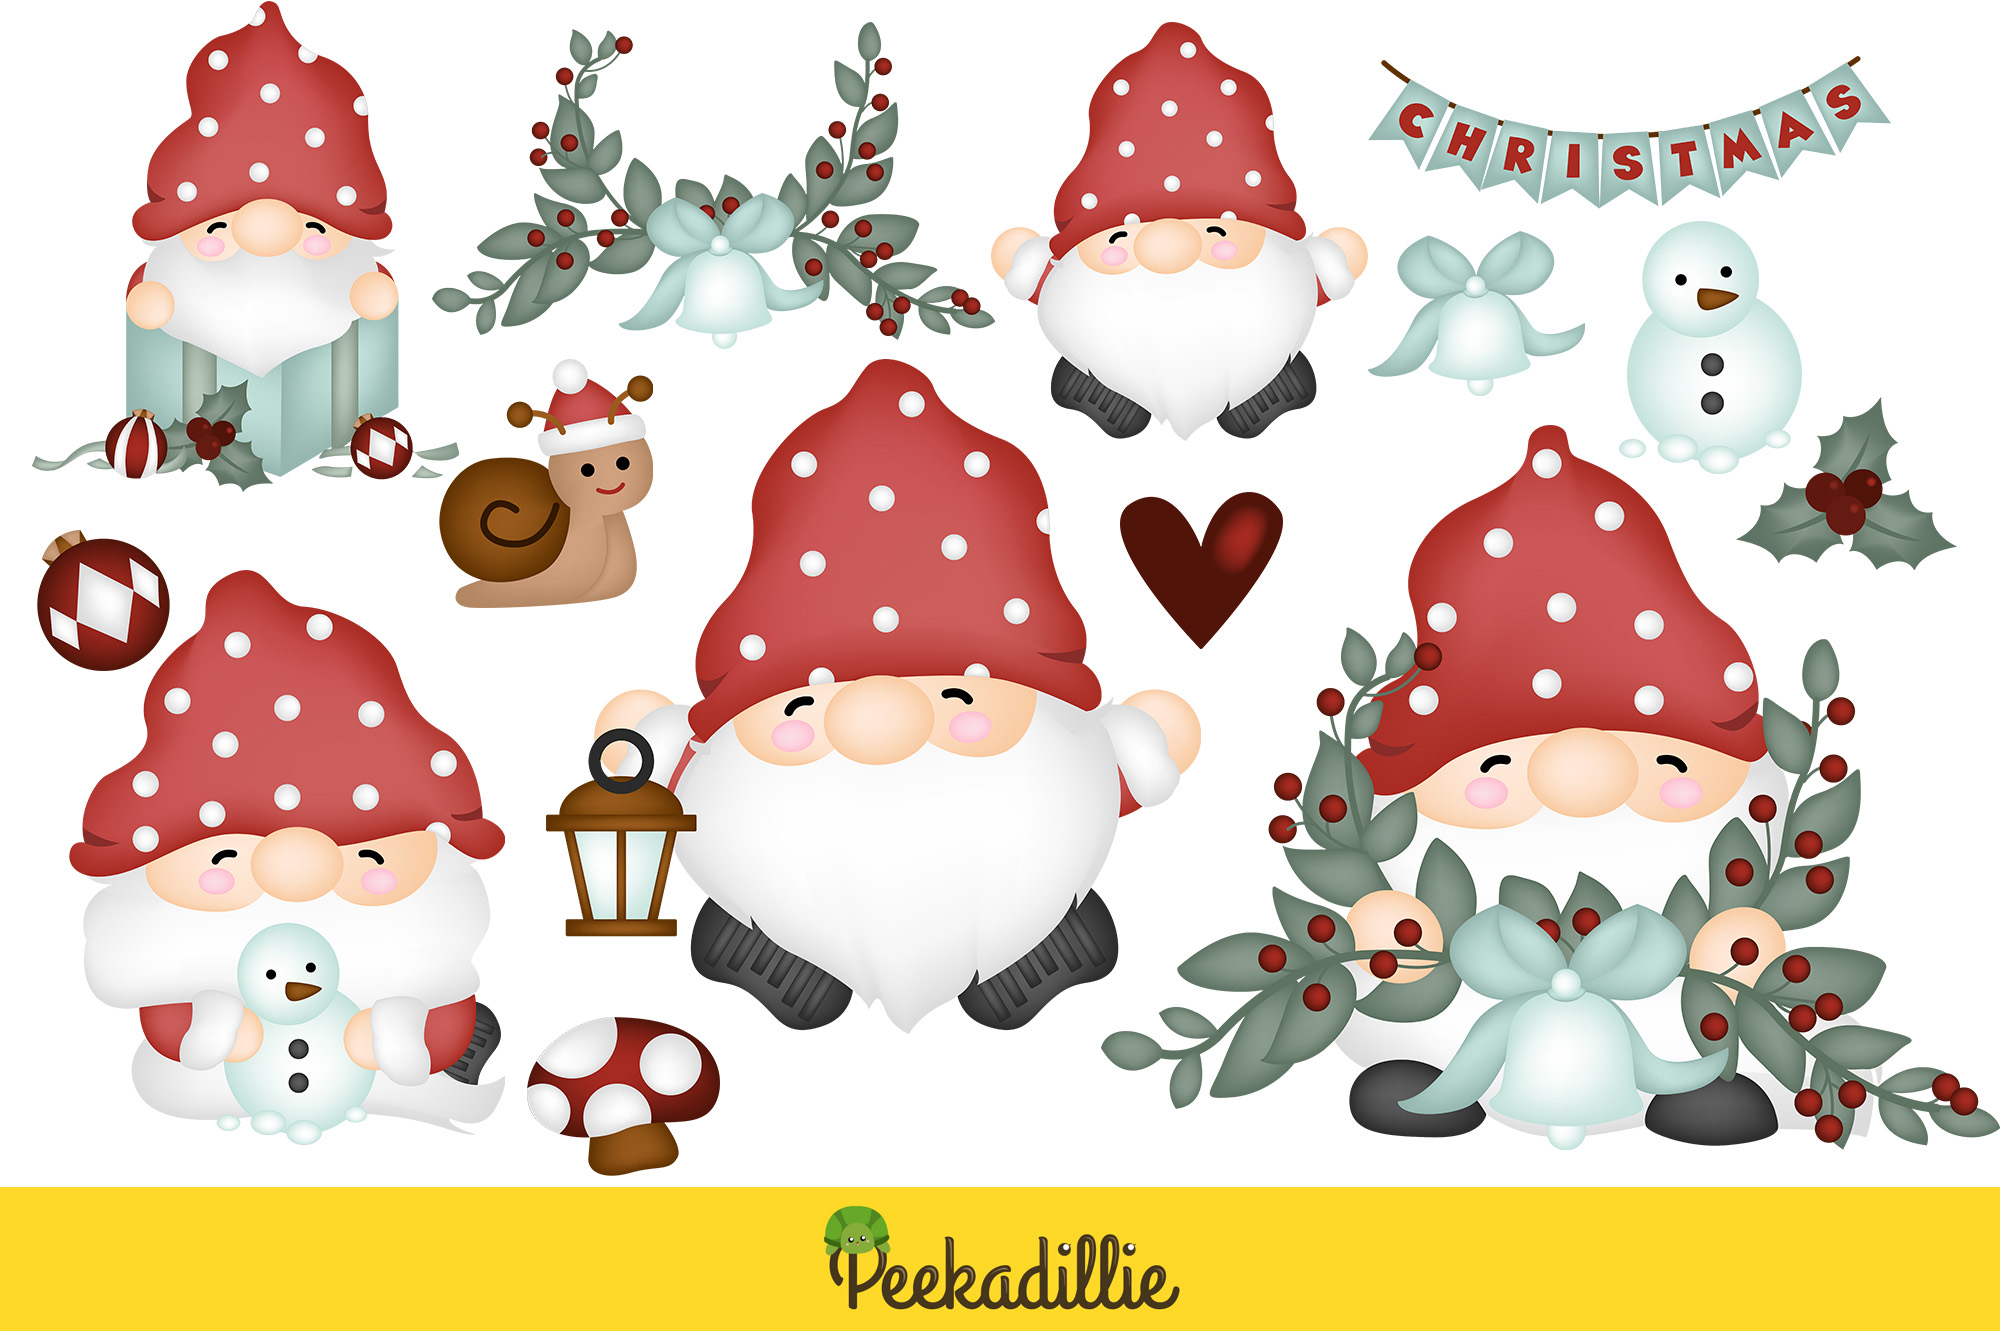 Set of gorgeous images of Christmas gnomes.